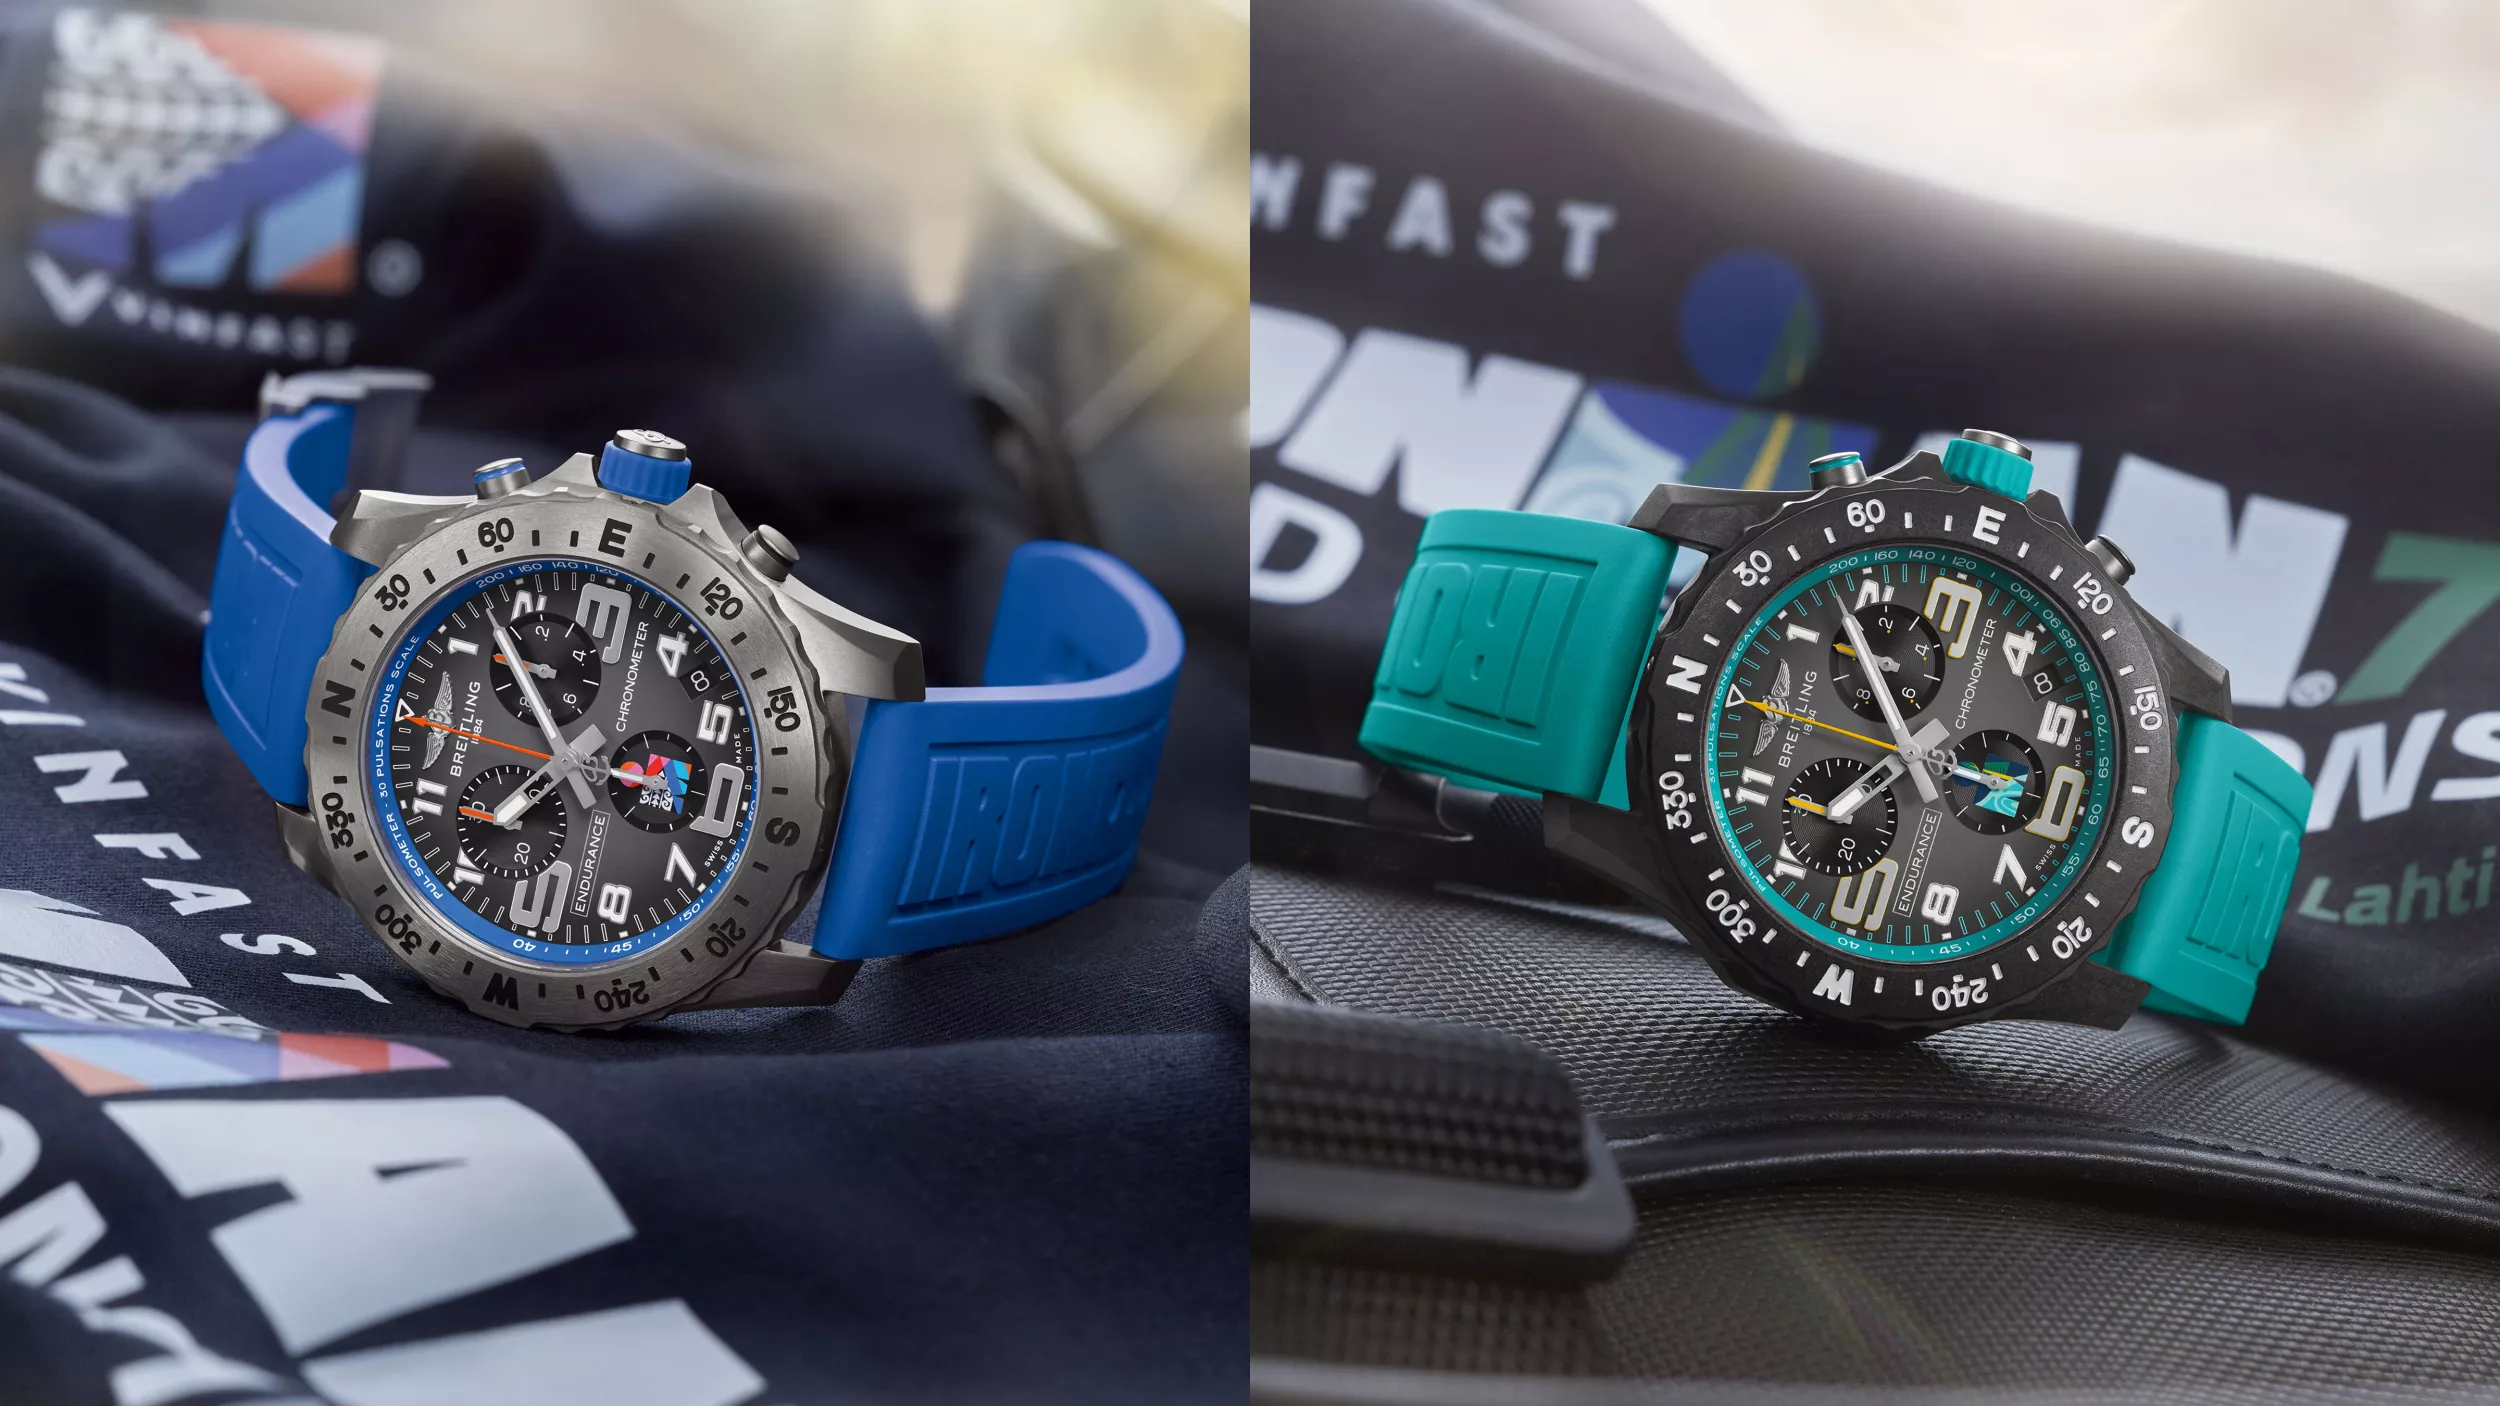 Mark your finish with the new Breitling Endurance Pro Ironman Limited Editions